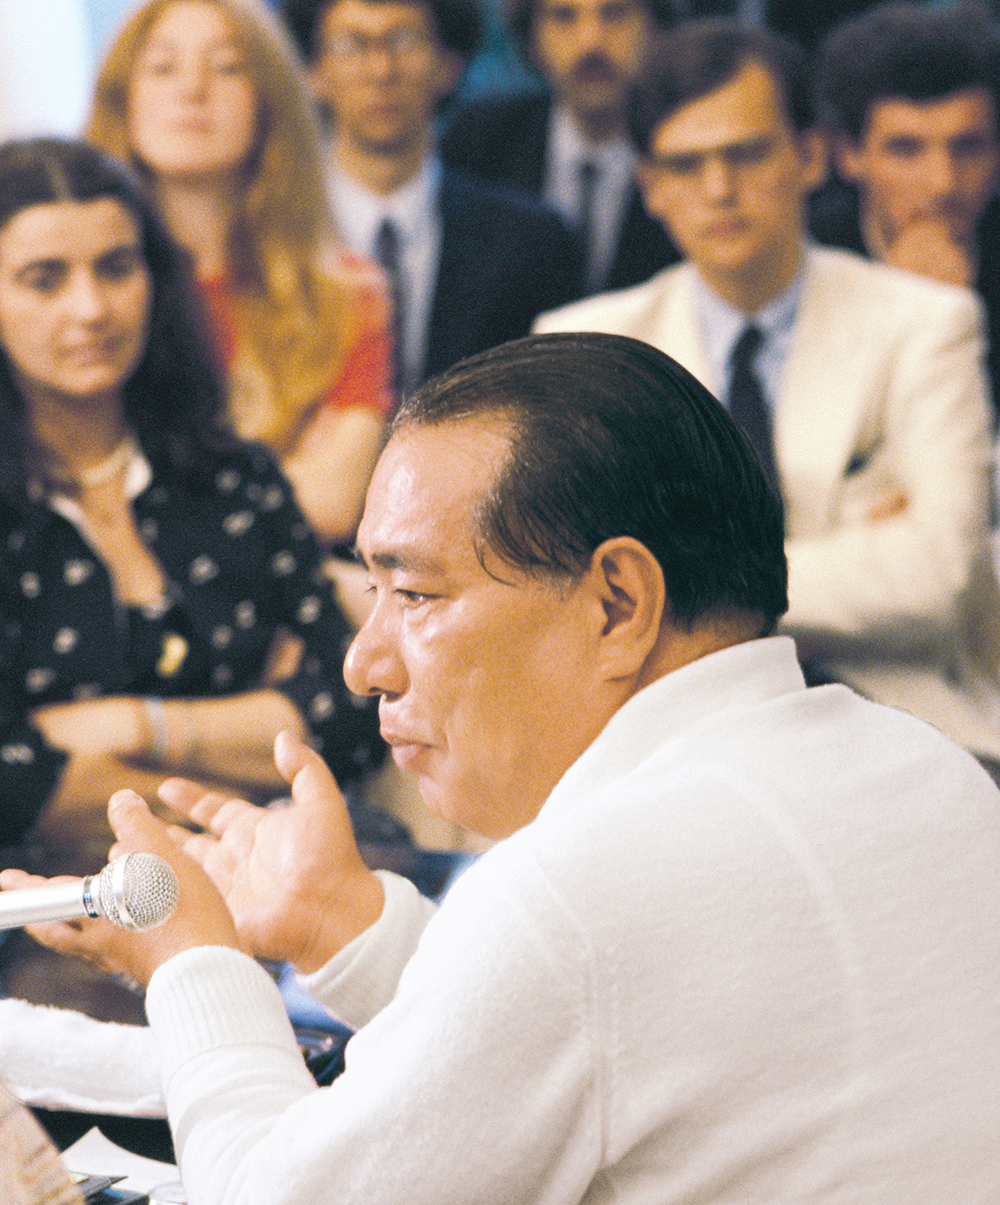 Ikeda was able to bring new relevance to Buddhist principles and values through his broad knowledge of classical Eastern and Western literature and philosophy. (Milan, Italy, June 1981)